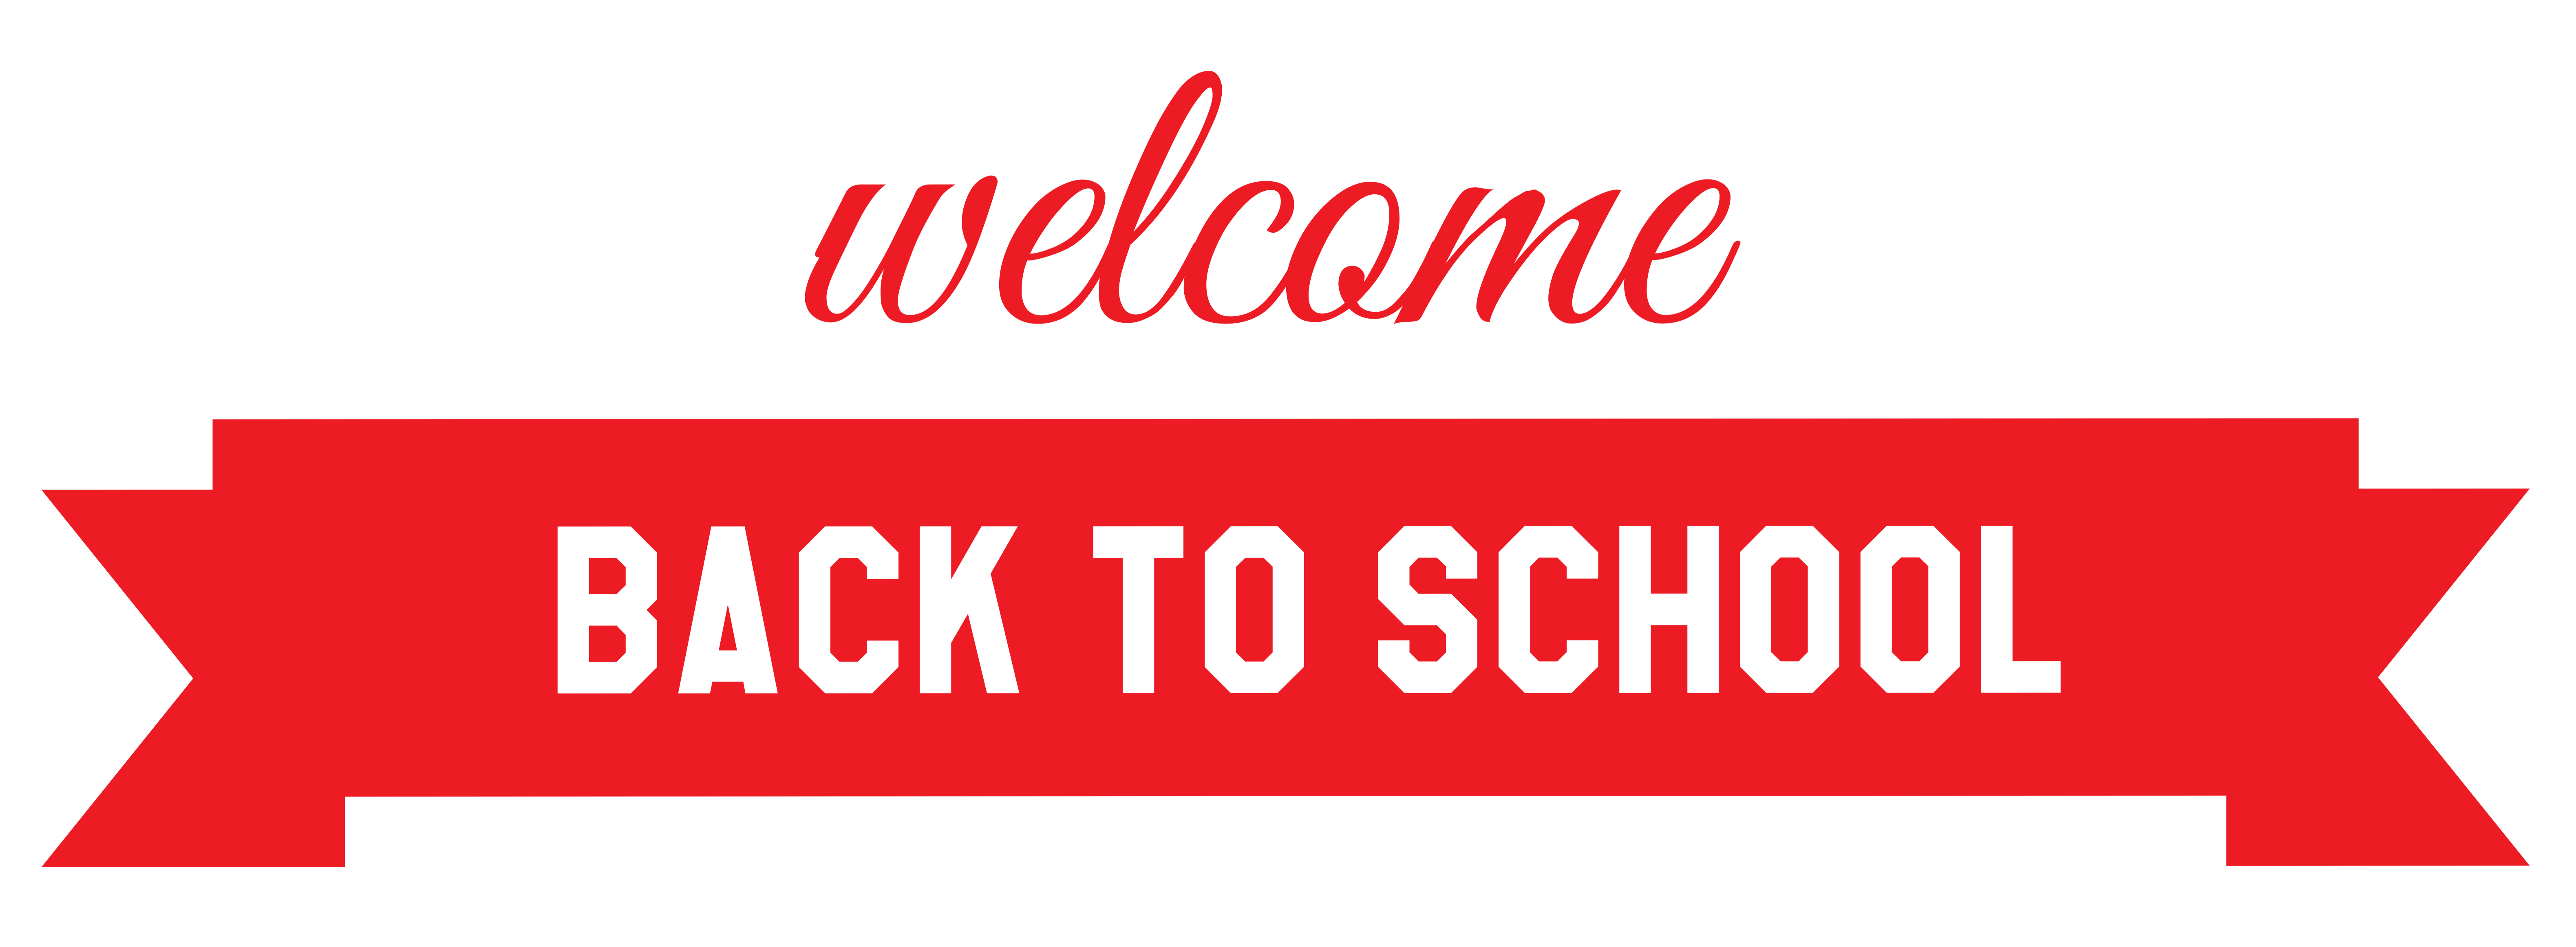 Red Welcome Back to School Banner PNG Image.